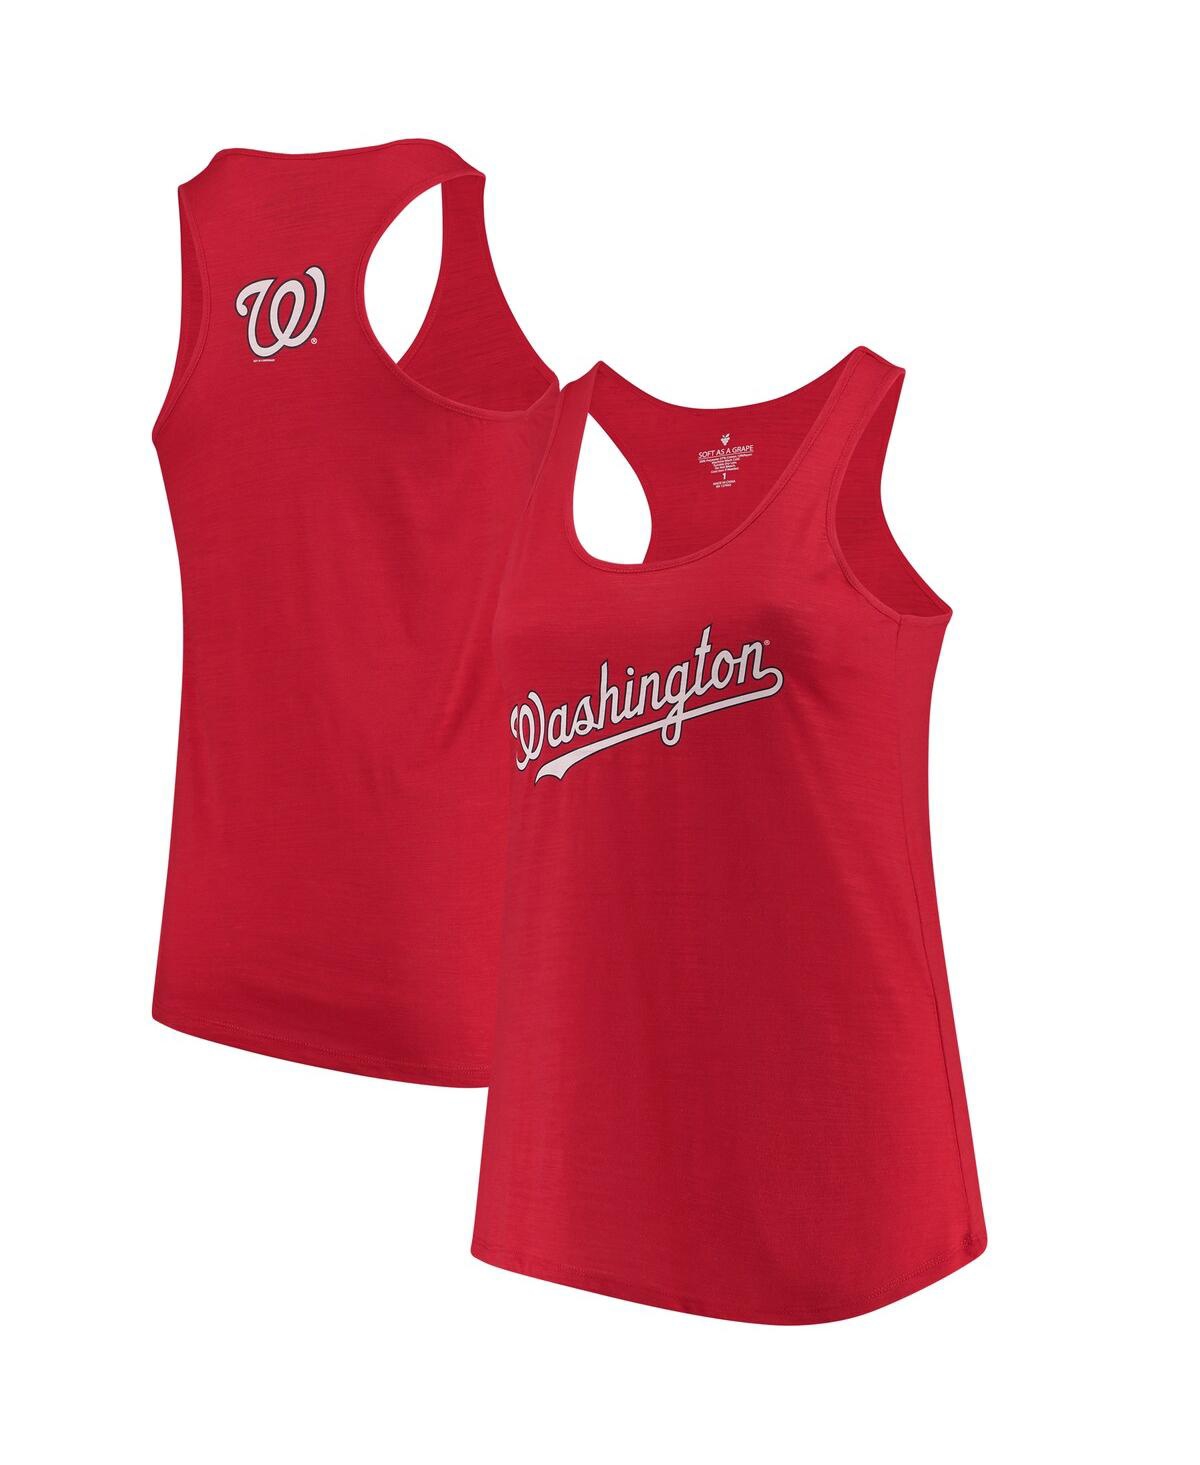 Women's Soft As A Grape Red Washington Nationals Plus Size Swing for the Fences Racerback Tank Top - Red